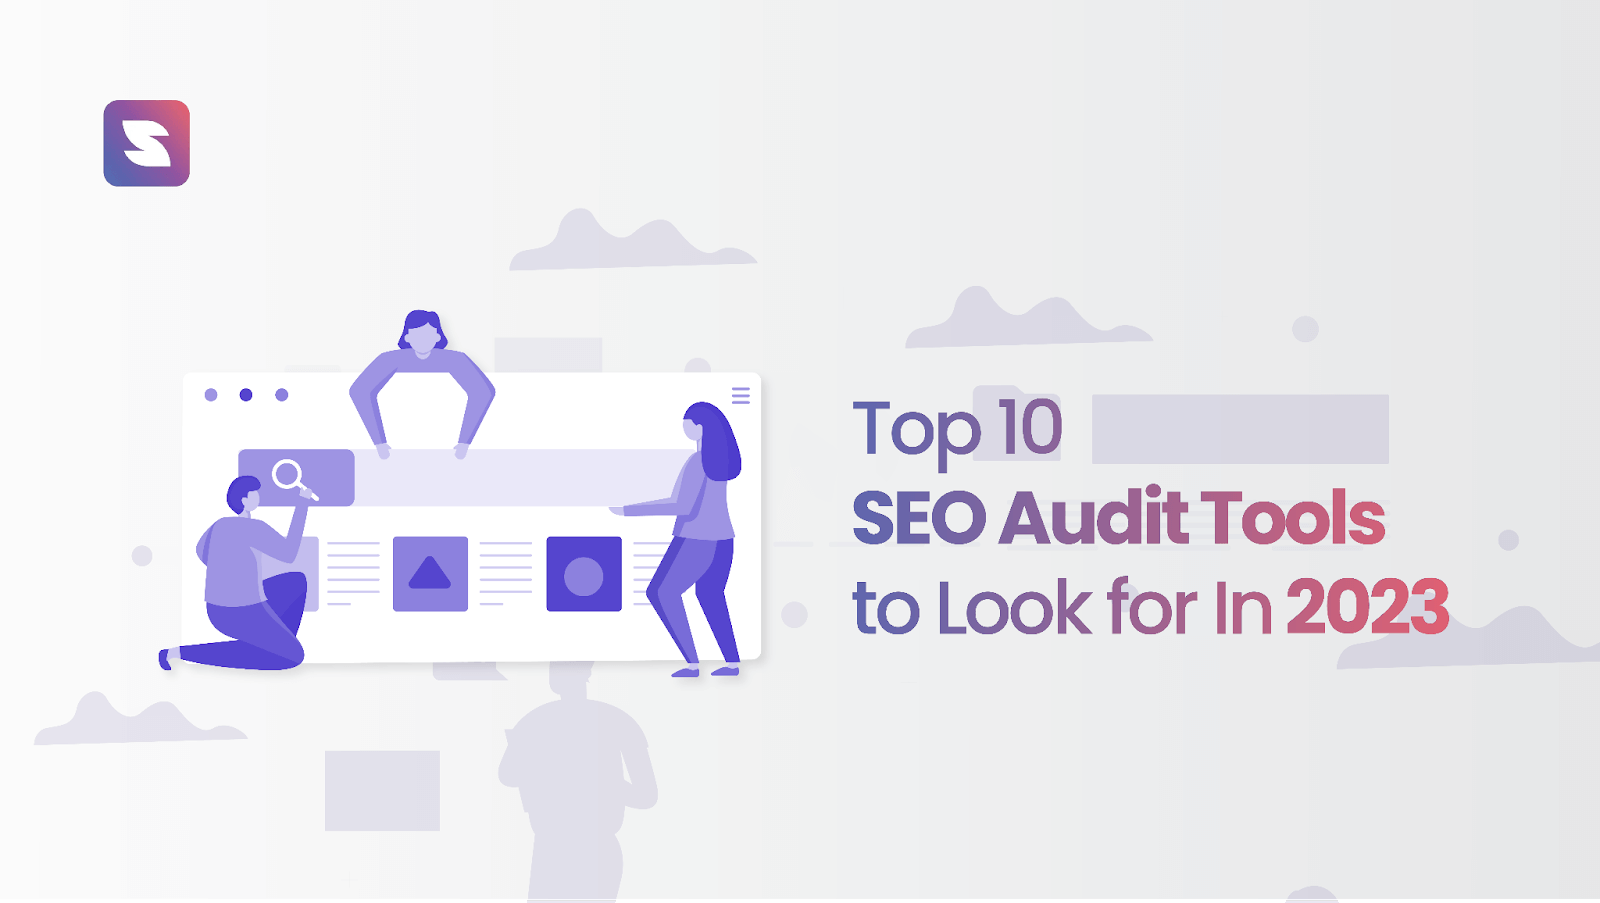 Top 10 SEO Audit Tools to Look for In 2023